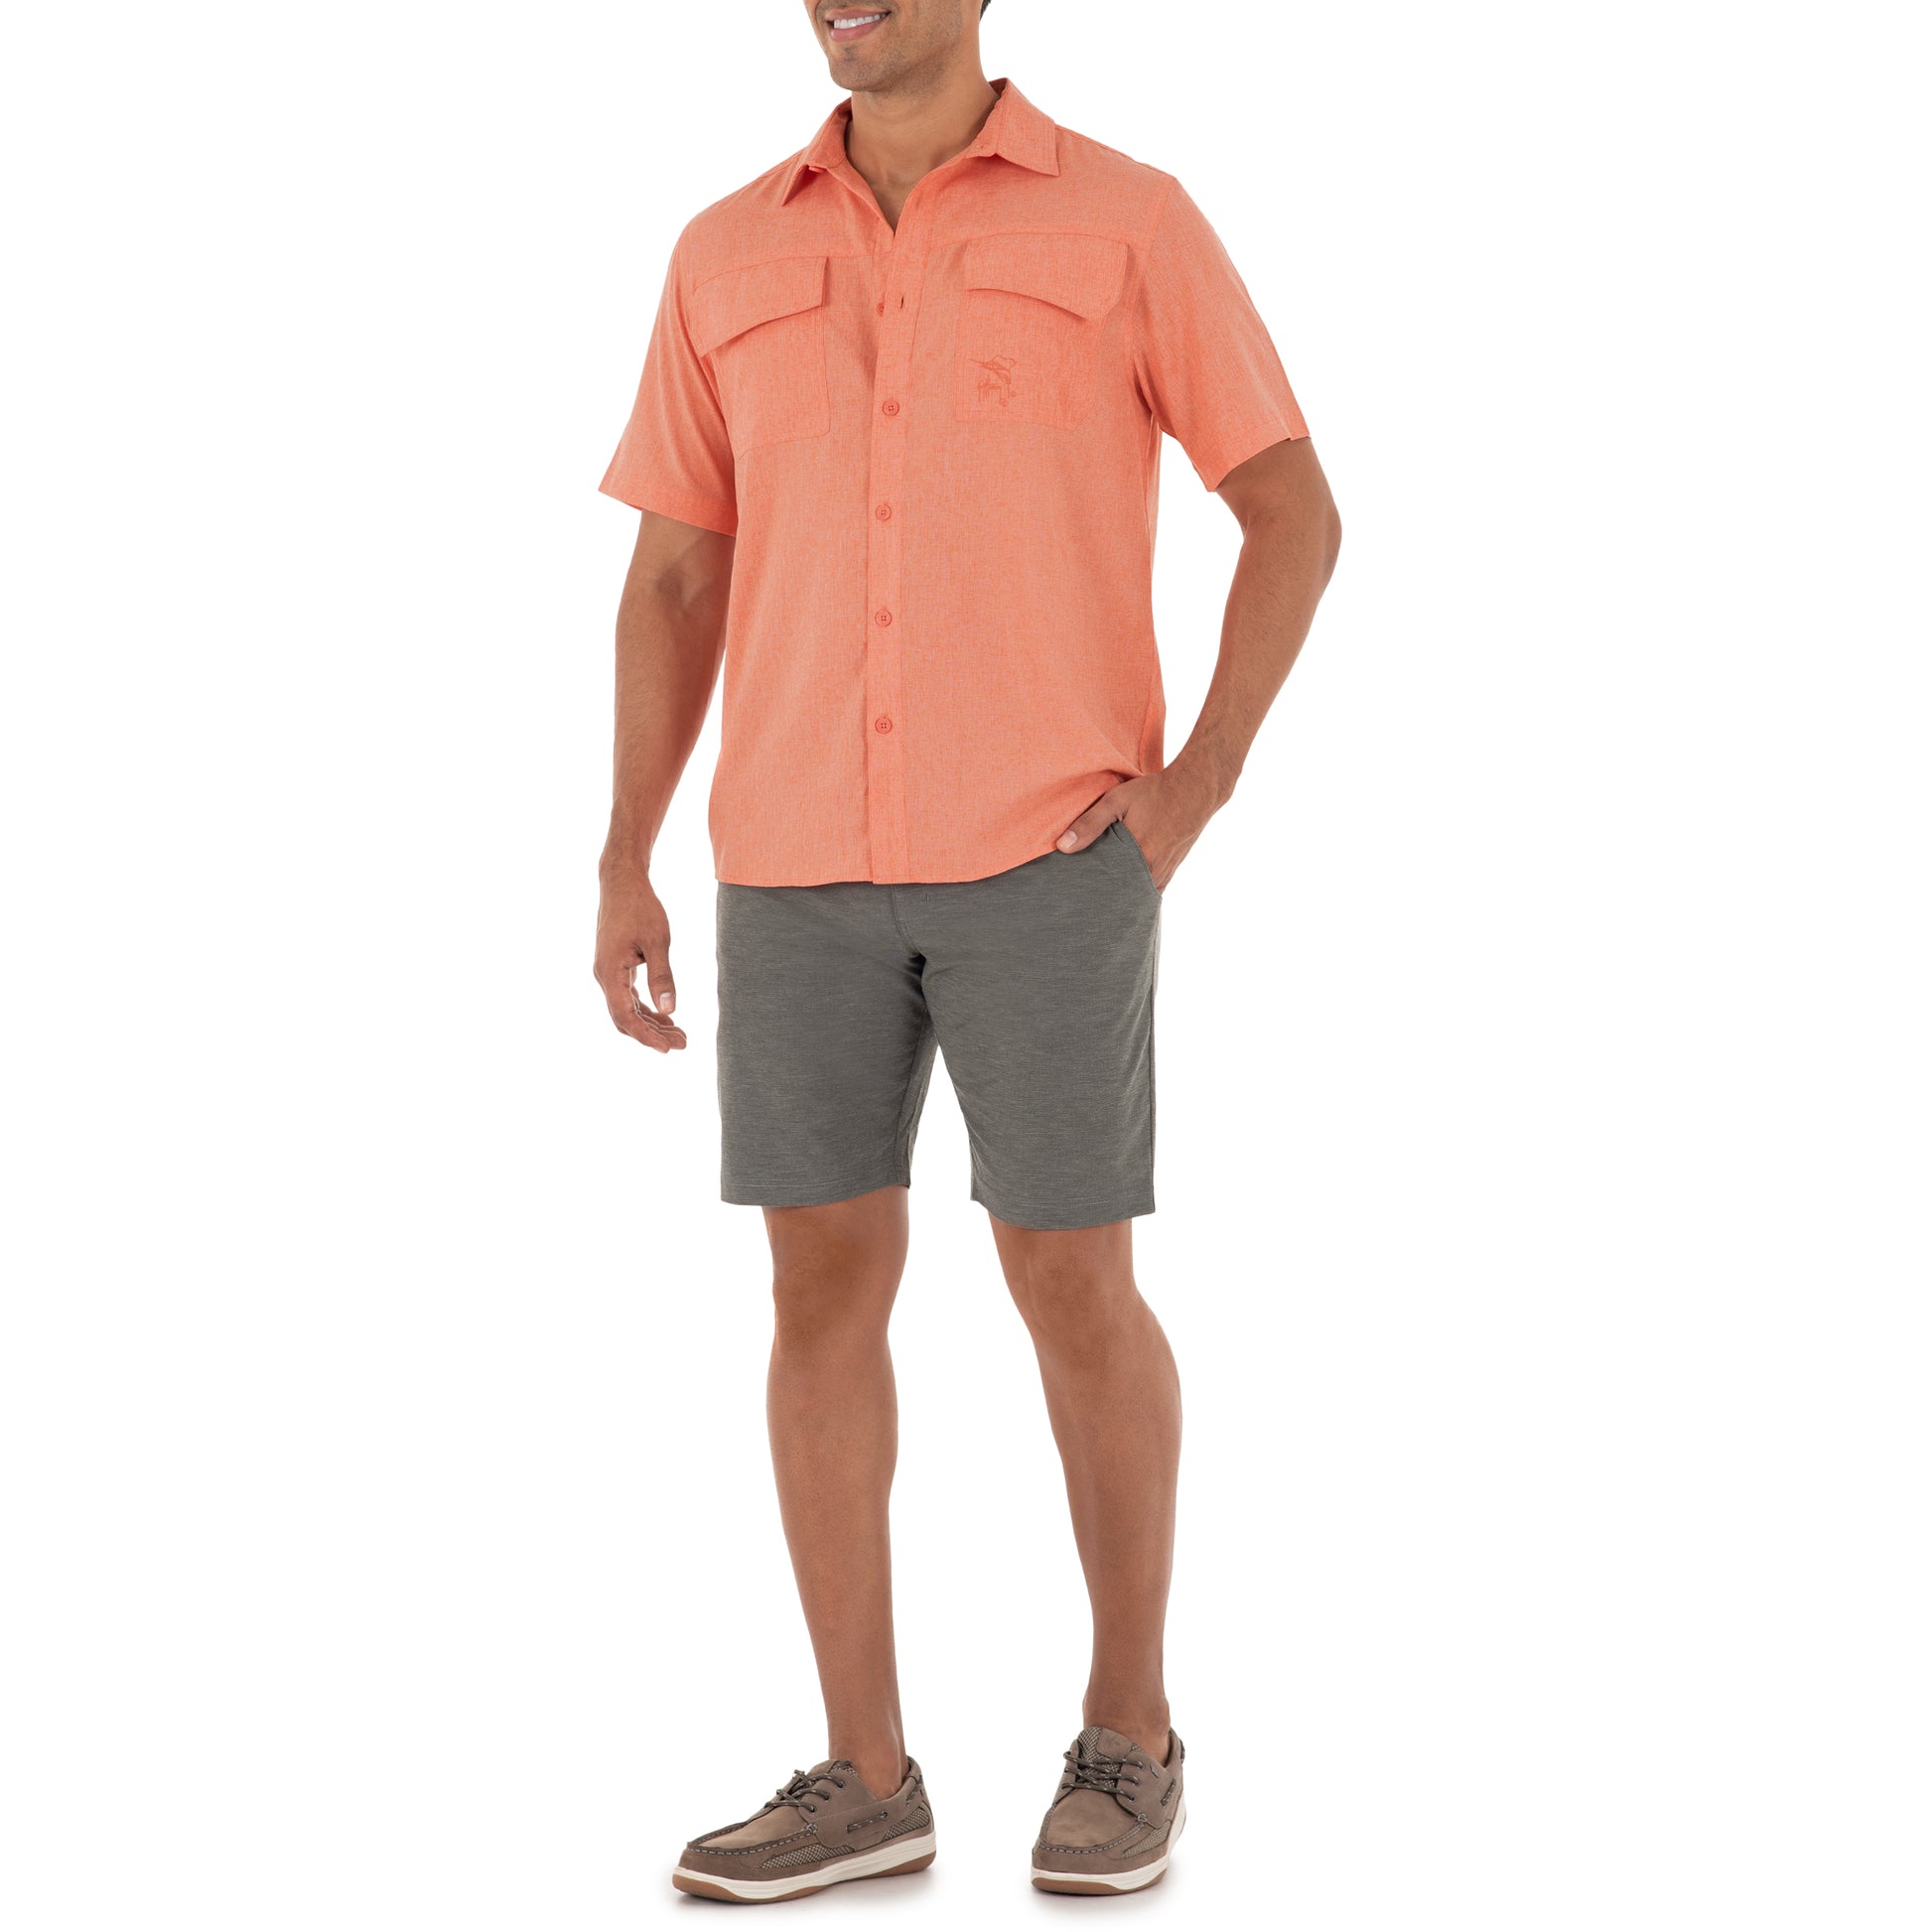 Men's Short Sleeve Heather Textured Cationic Coral Fishing Shirt View 4